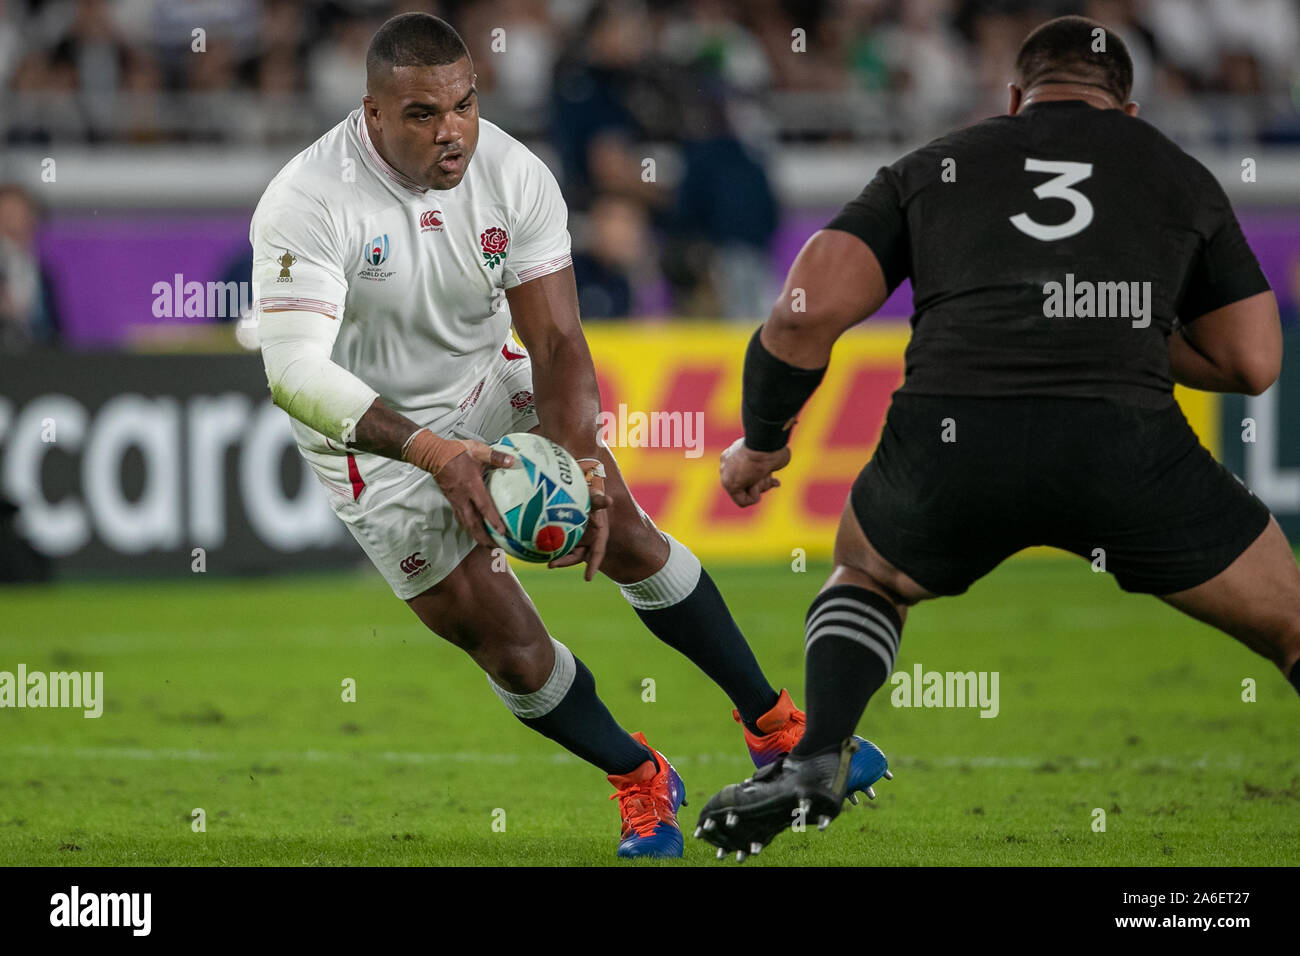 Yokohama, Japan. 26th Oct, 2019. Kyle Sinckler of England runs with the ball during the Rugby World Cup semi-final match between England and New Zealand in Kanagawa Prefecture, Japan, on October 26, 2019. Credit: European Sports Photographic Agency/Alamy Live News Stock Photo